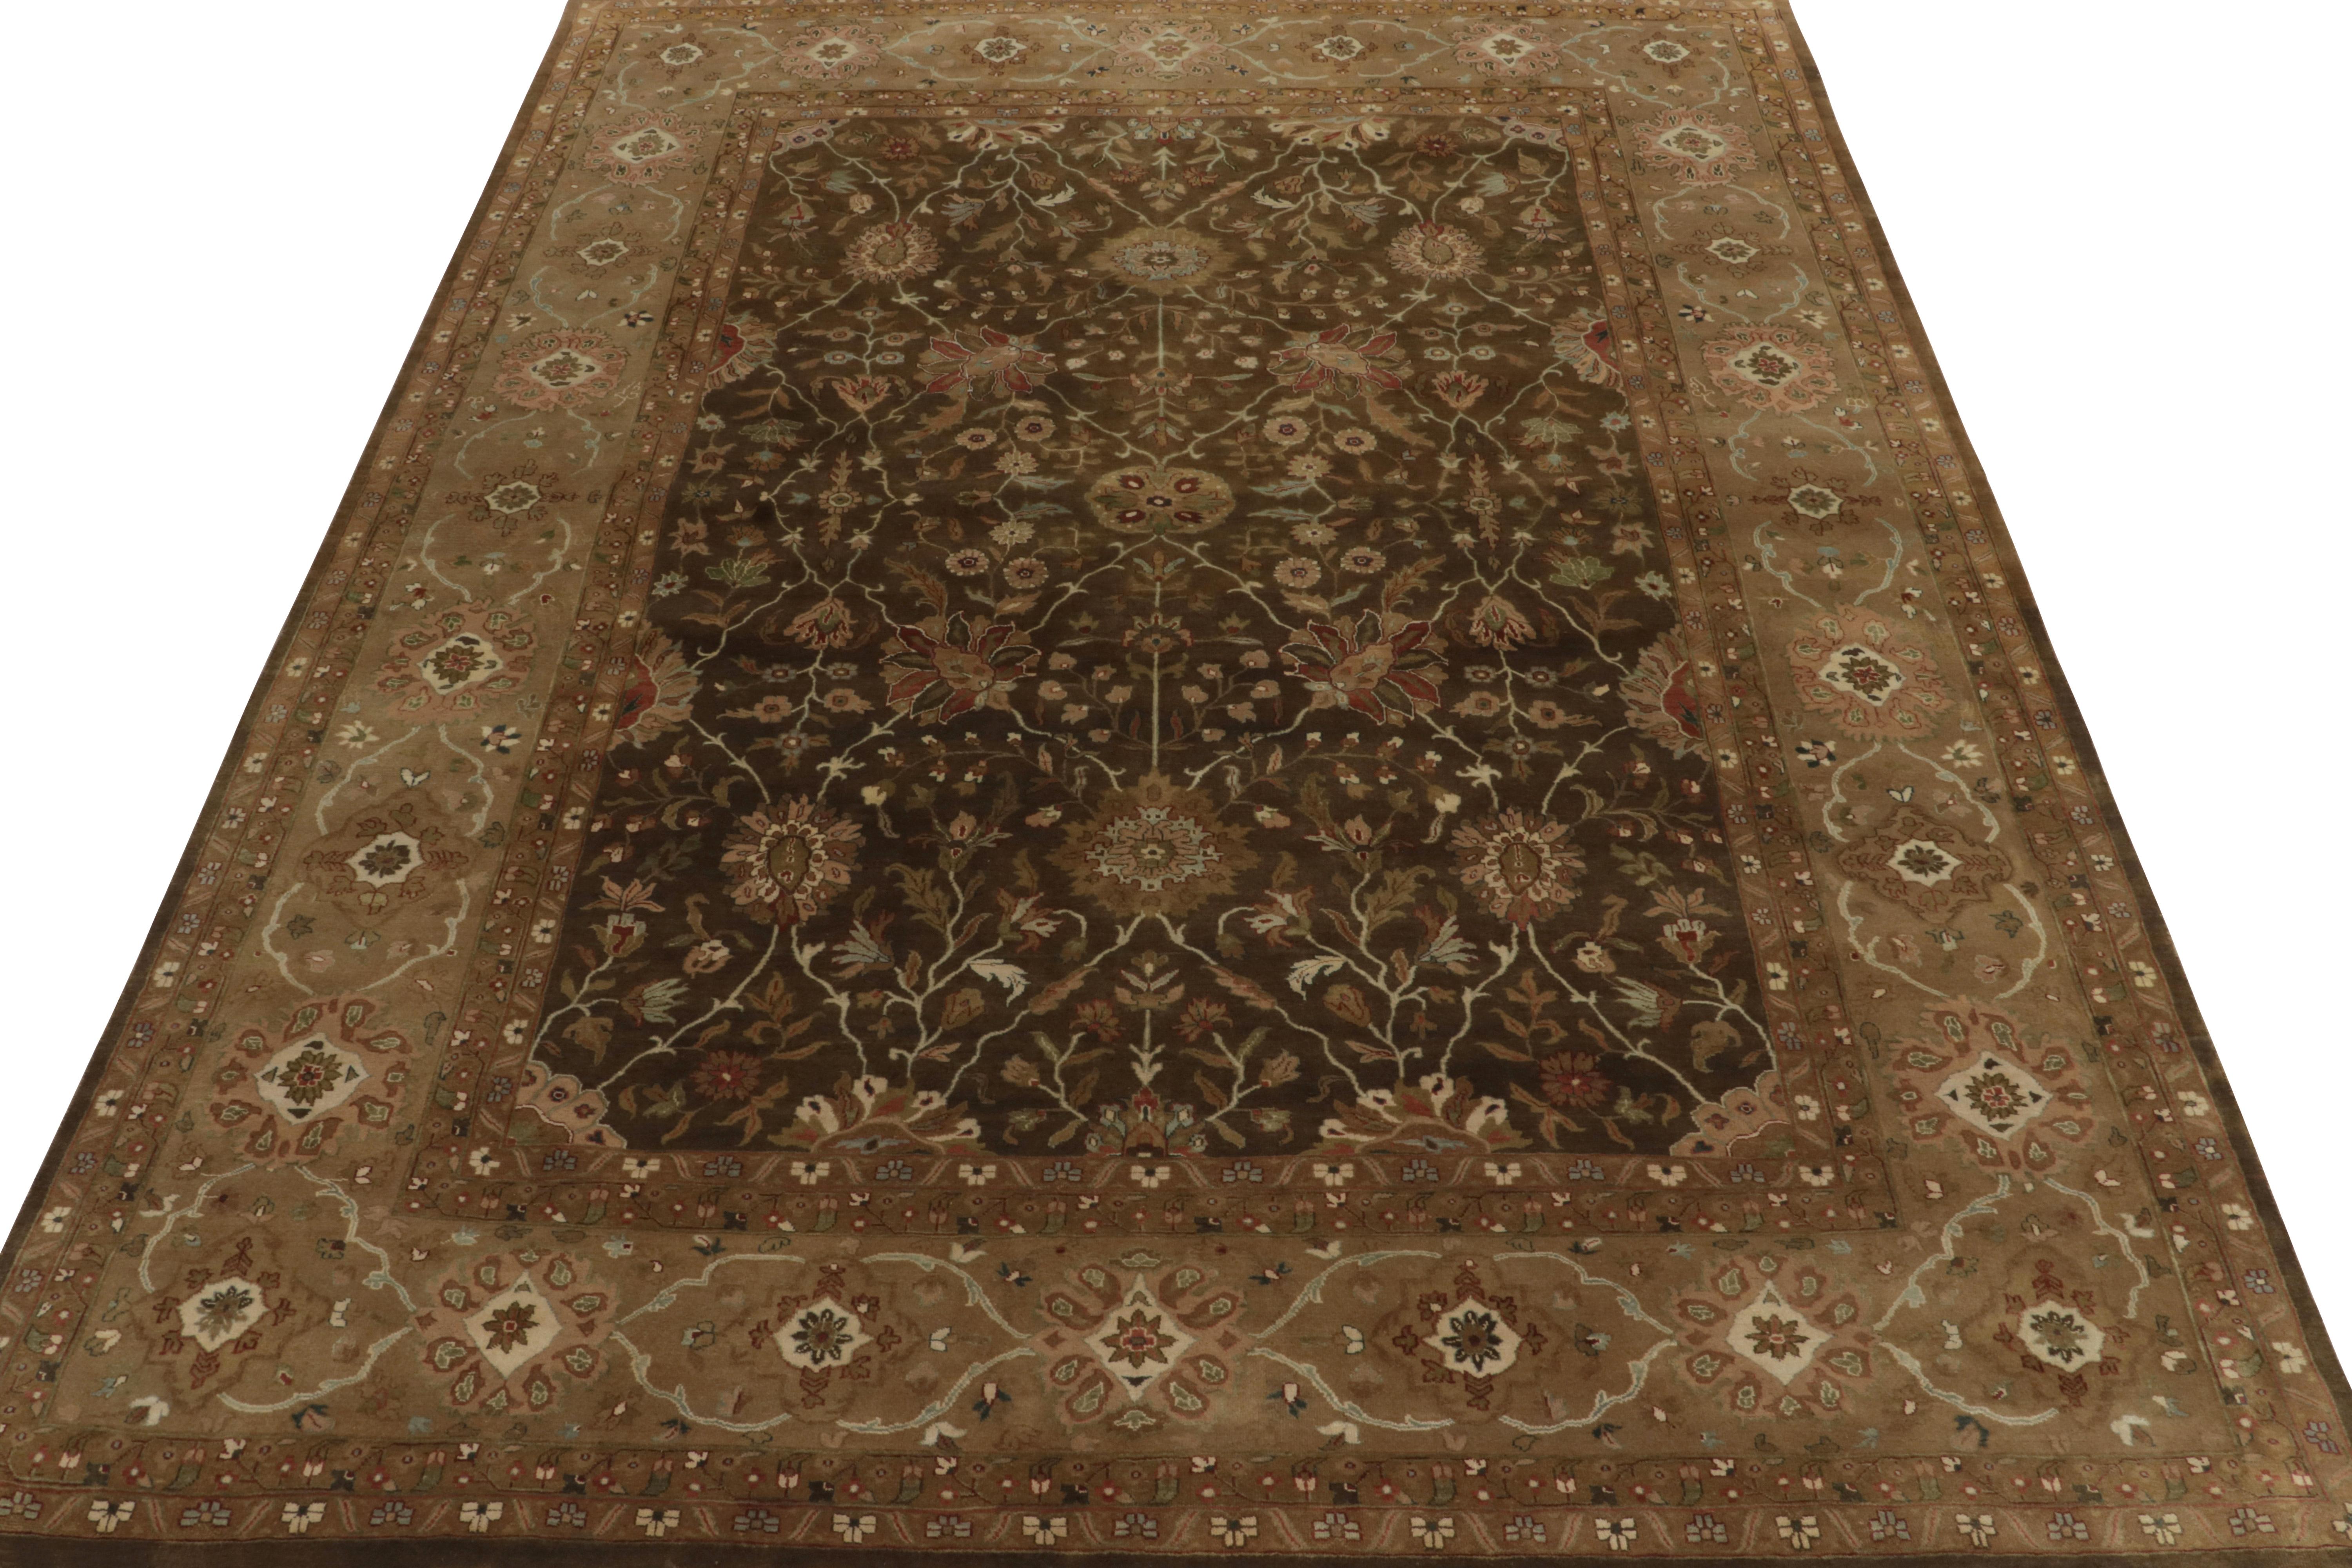 Indian Rug & Kilim’s Tabriz style rug in Brown, Gold and Green Floral Patterns For Sale